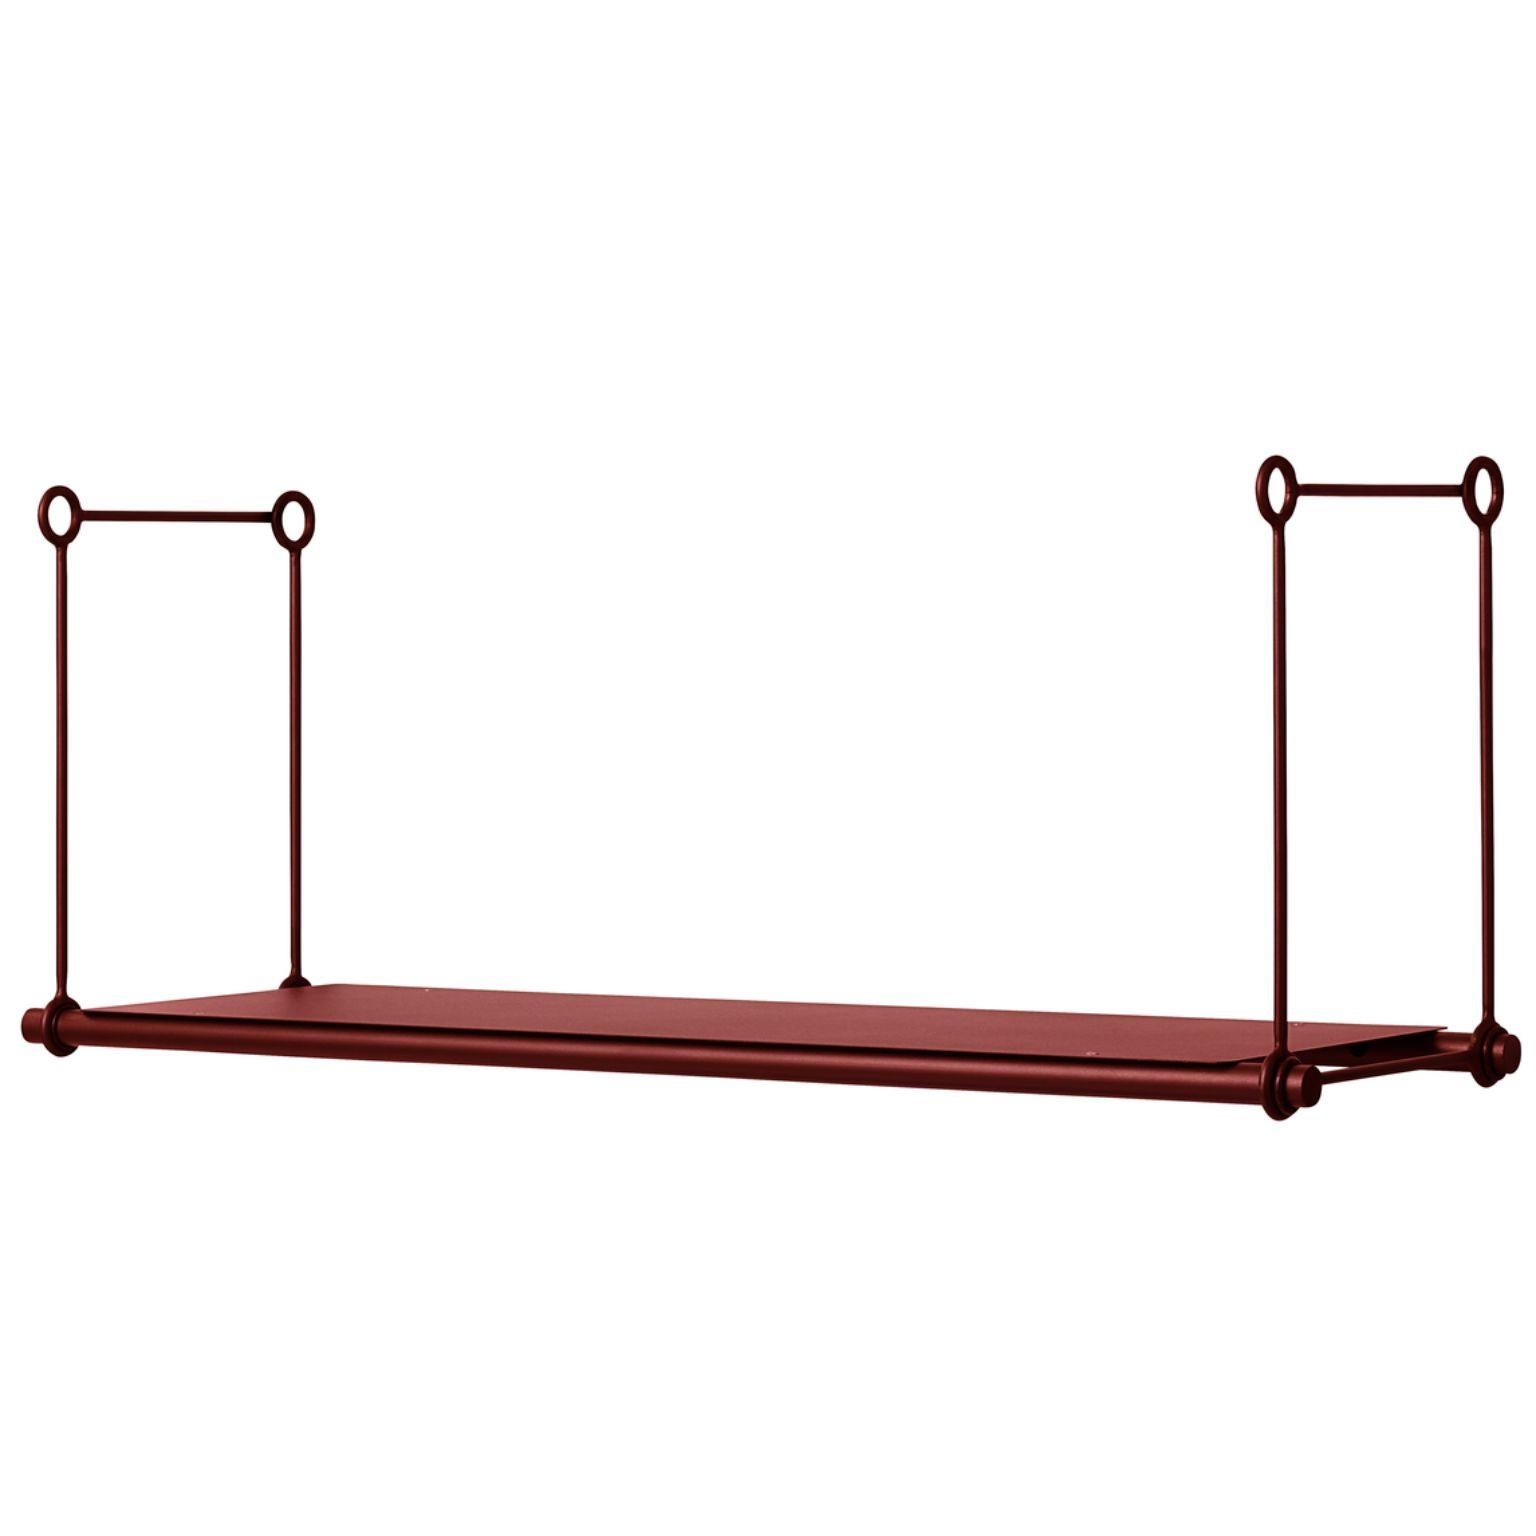 Parade 1 shelf extention oxide red by Warm Nordic
Dimensions: D 100 x W 30 x H 39cm
Material: Powder coated steel
Weight: 4 kg
Also available in different colours and dimensions.

Elegant metal shelving unit with plenty of space for all your